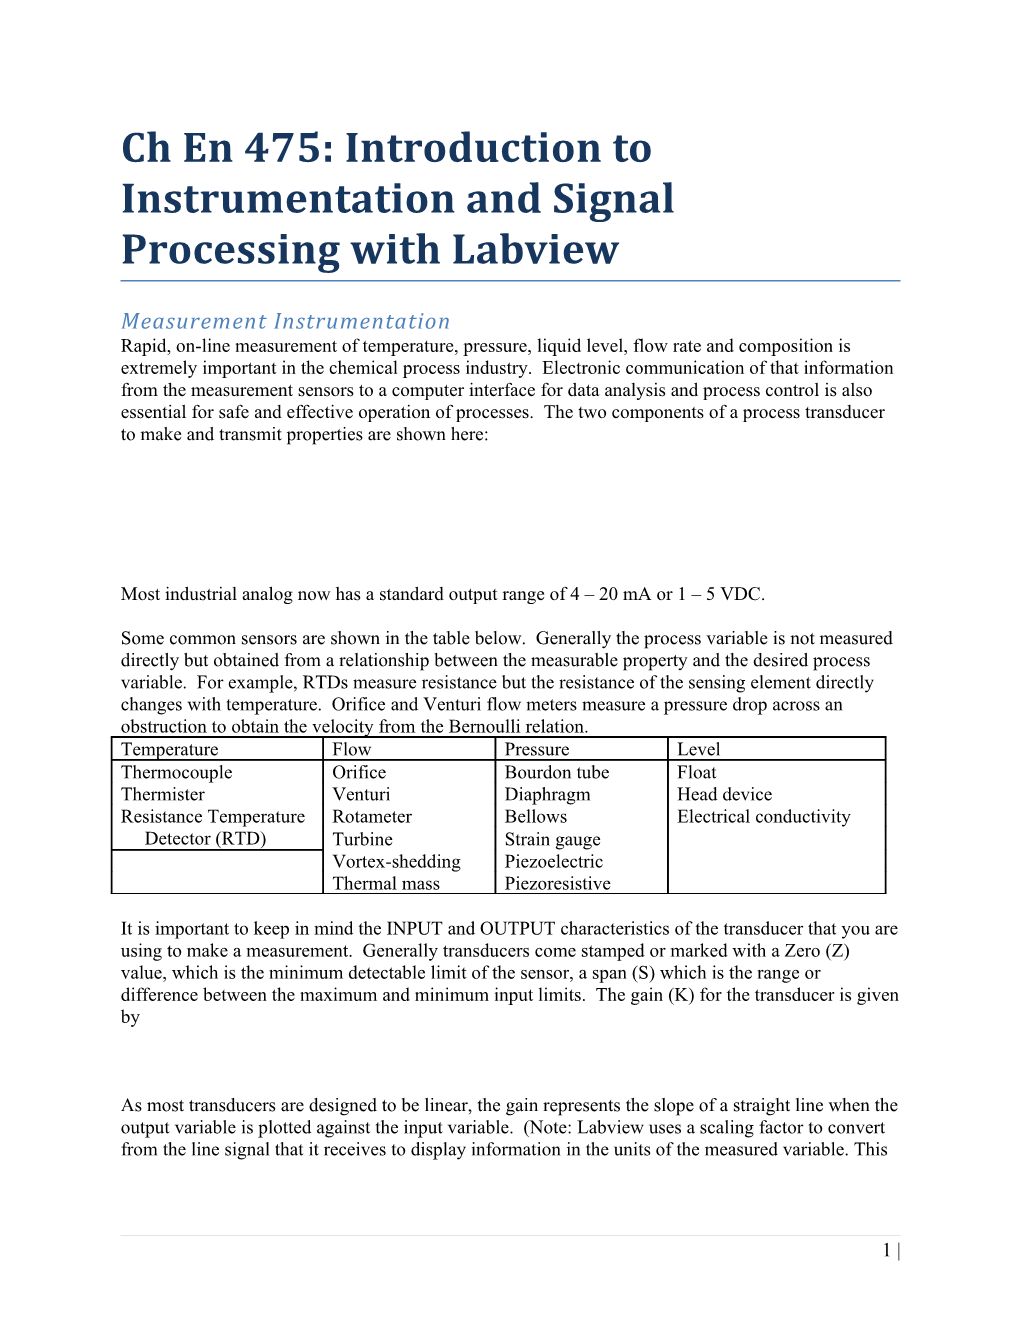 Ch En 475:Introduction to Instrumentation and Signal Processing with Labview